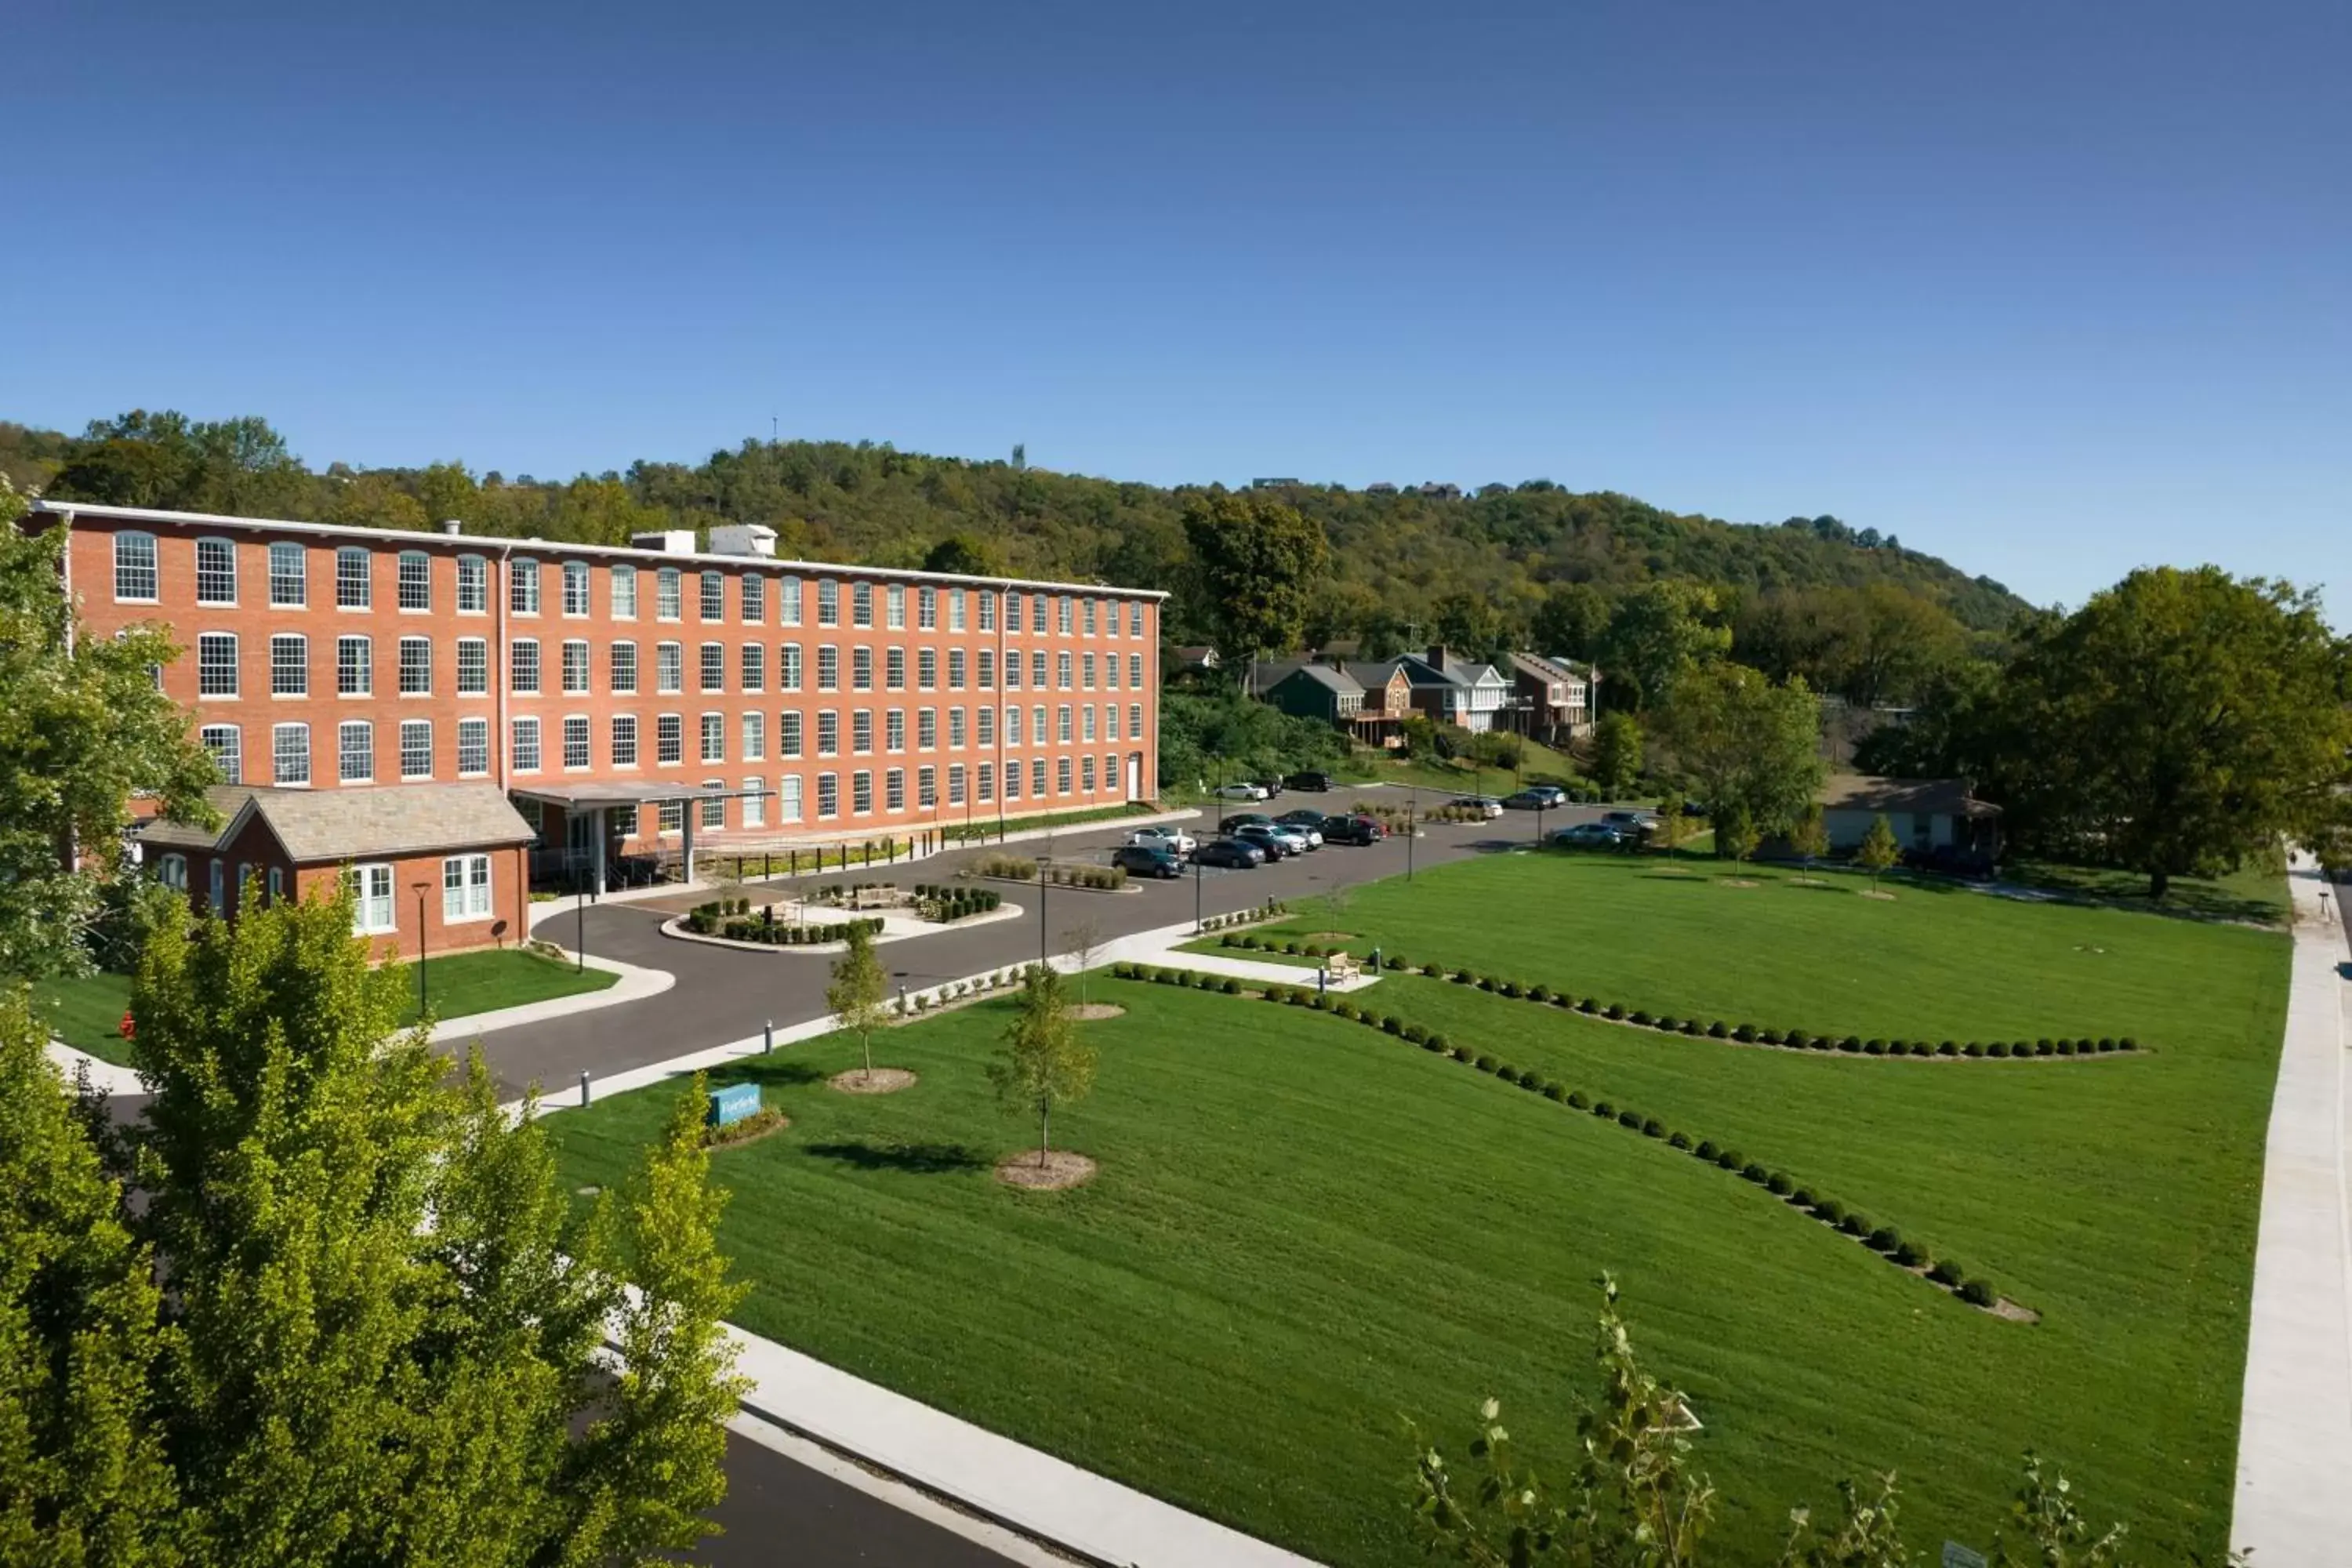 Property building, Bird's-eye View in Fairfield Inn & Suites Madison Historic Eagle Cotton Mill